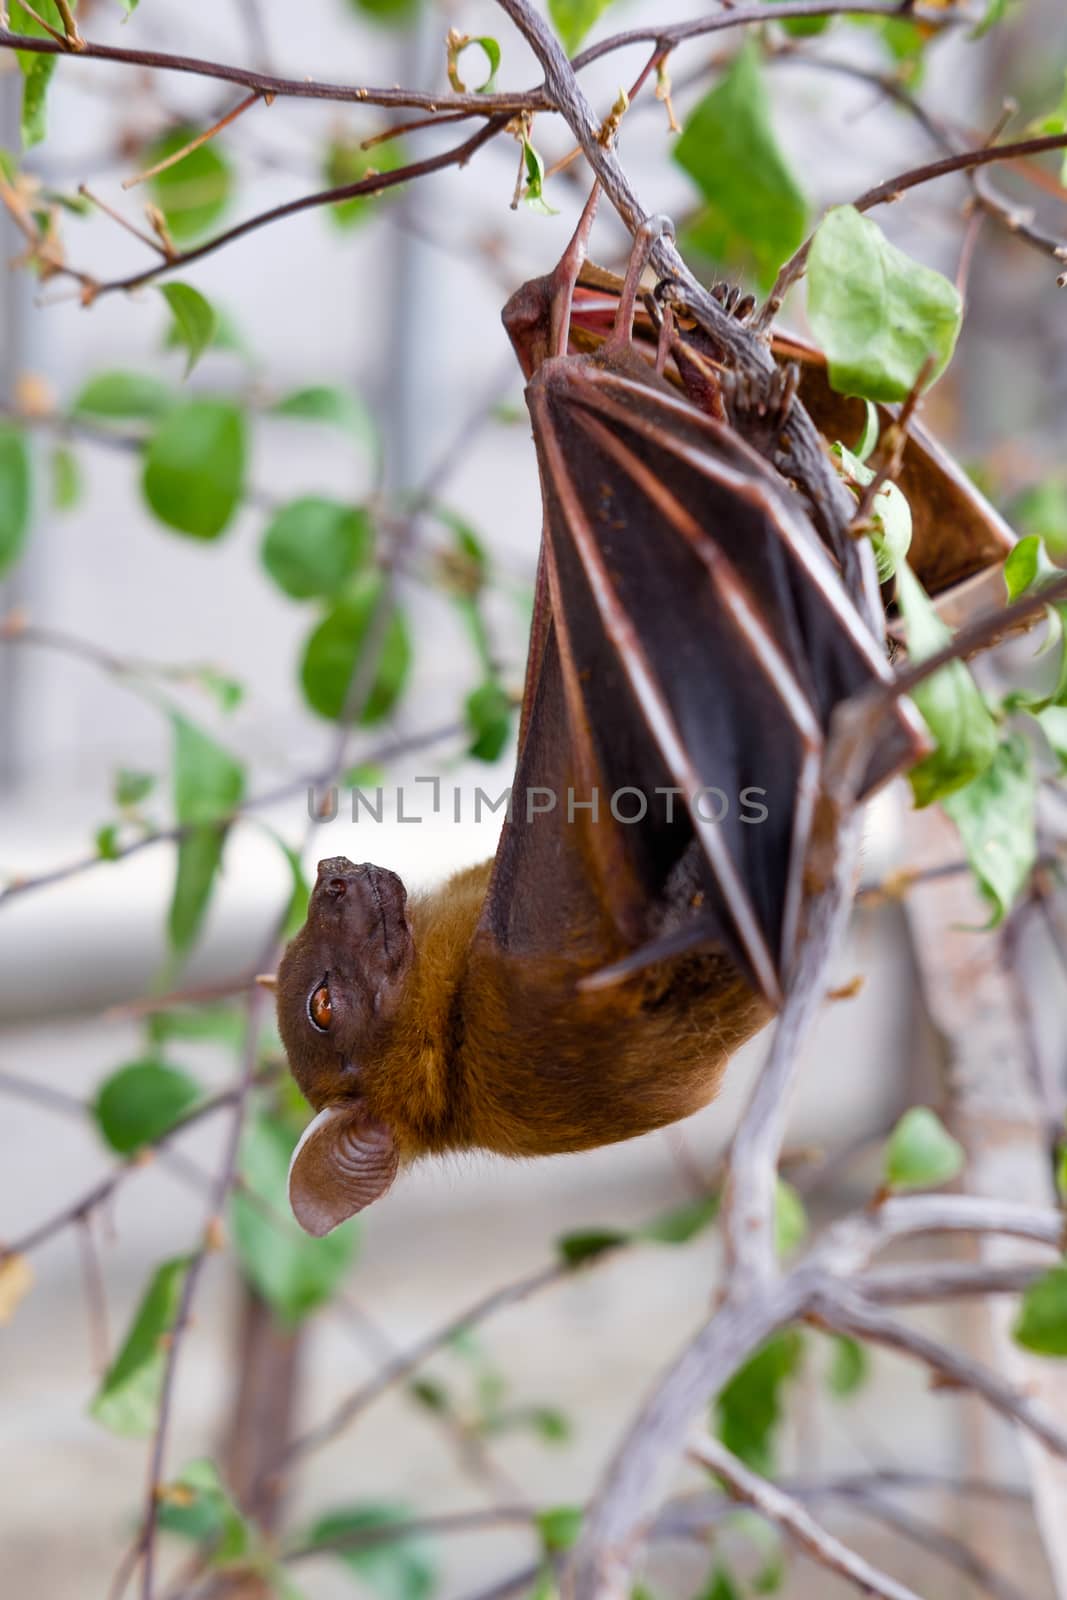 The Lesser short-nosed fruit bat (Cynopterus brachyotis). In the by rainfallsup